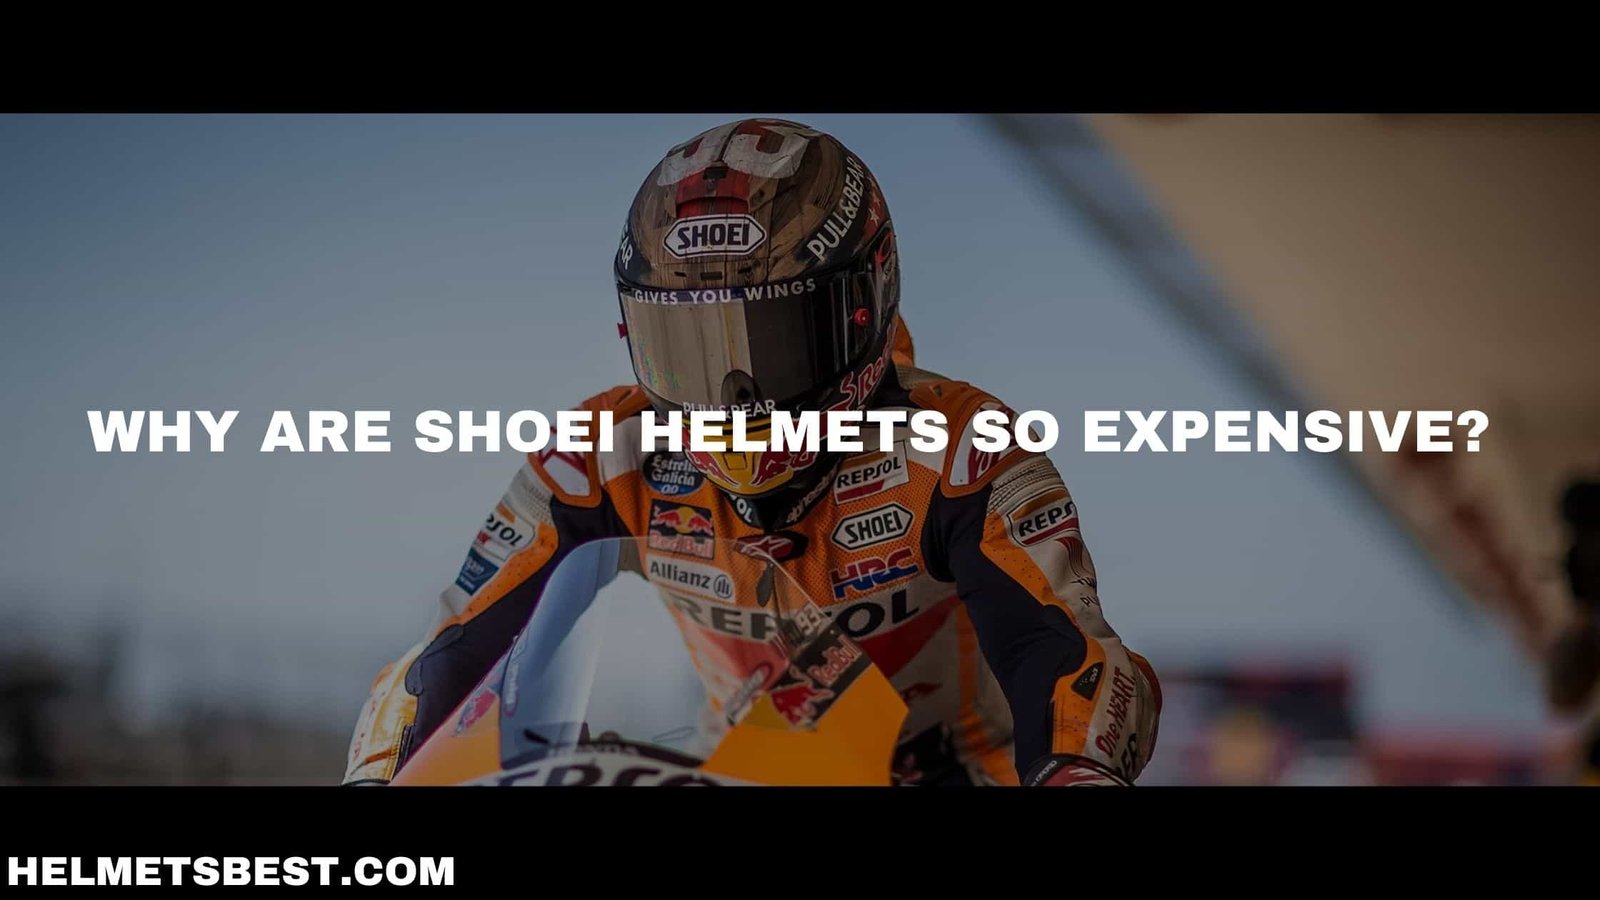 Why are Shoei helmets so expensive?